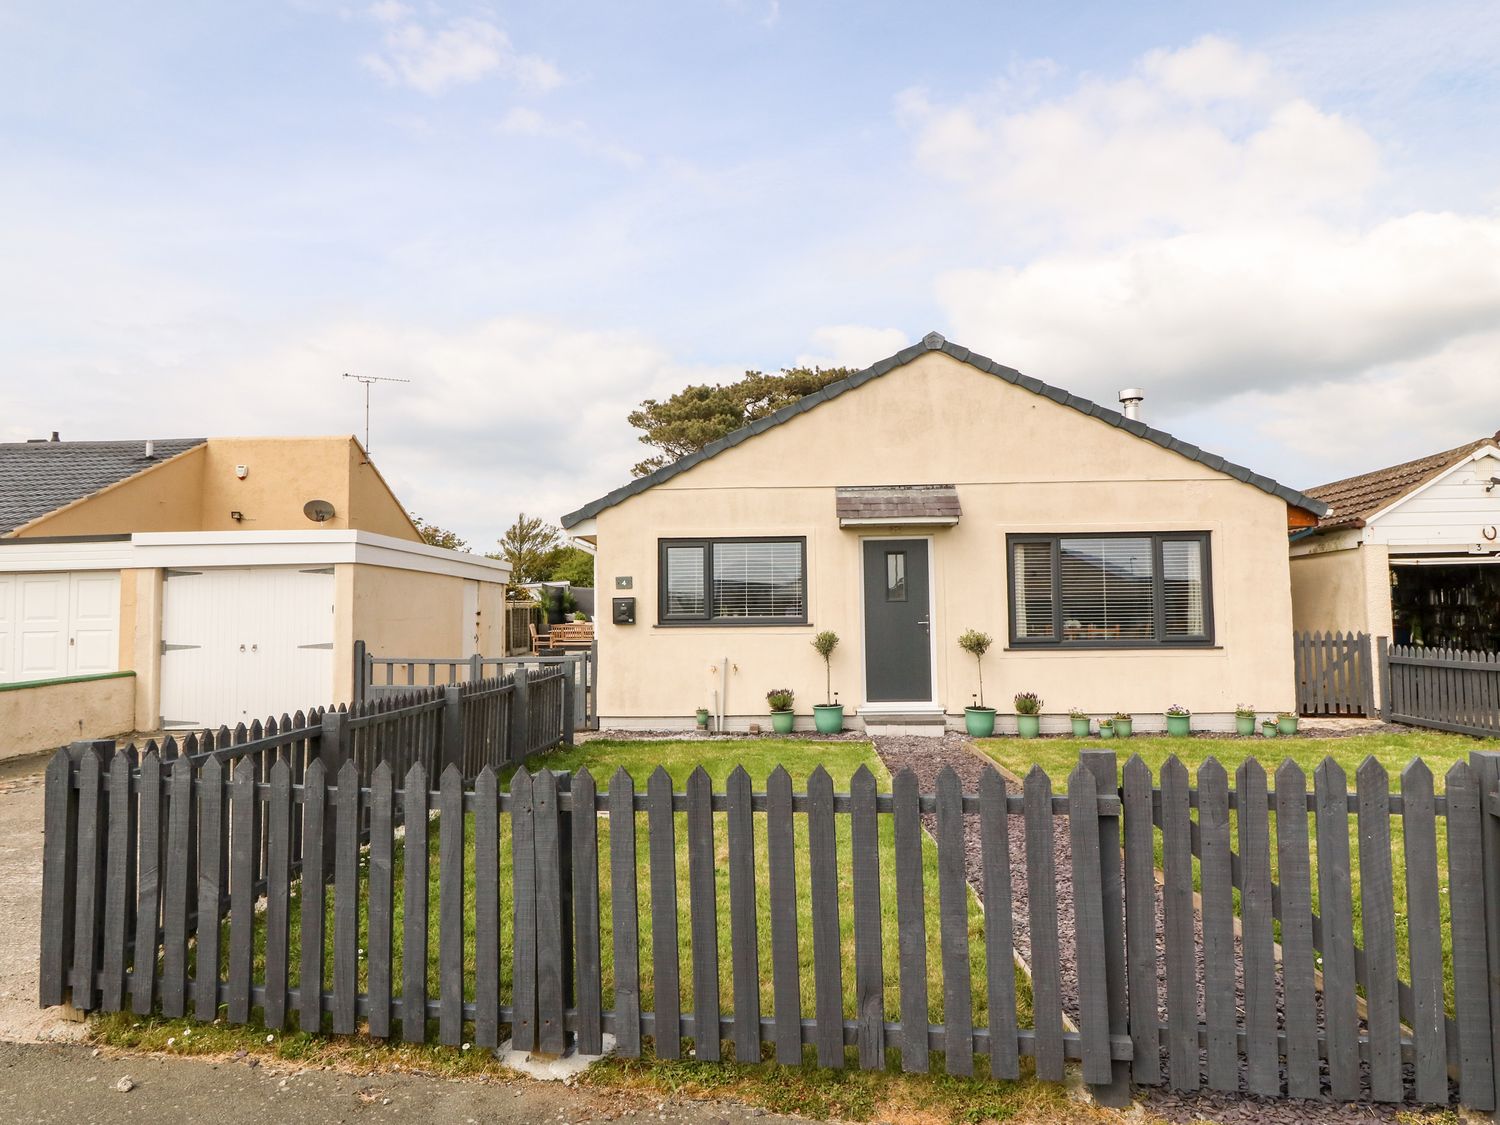 4 Newlands Park Estate is in Valley, Anglesey. Contemporary home with hot tub & pet-friendly garden.